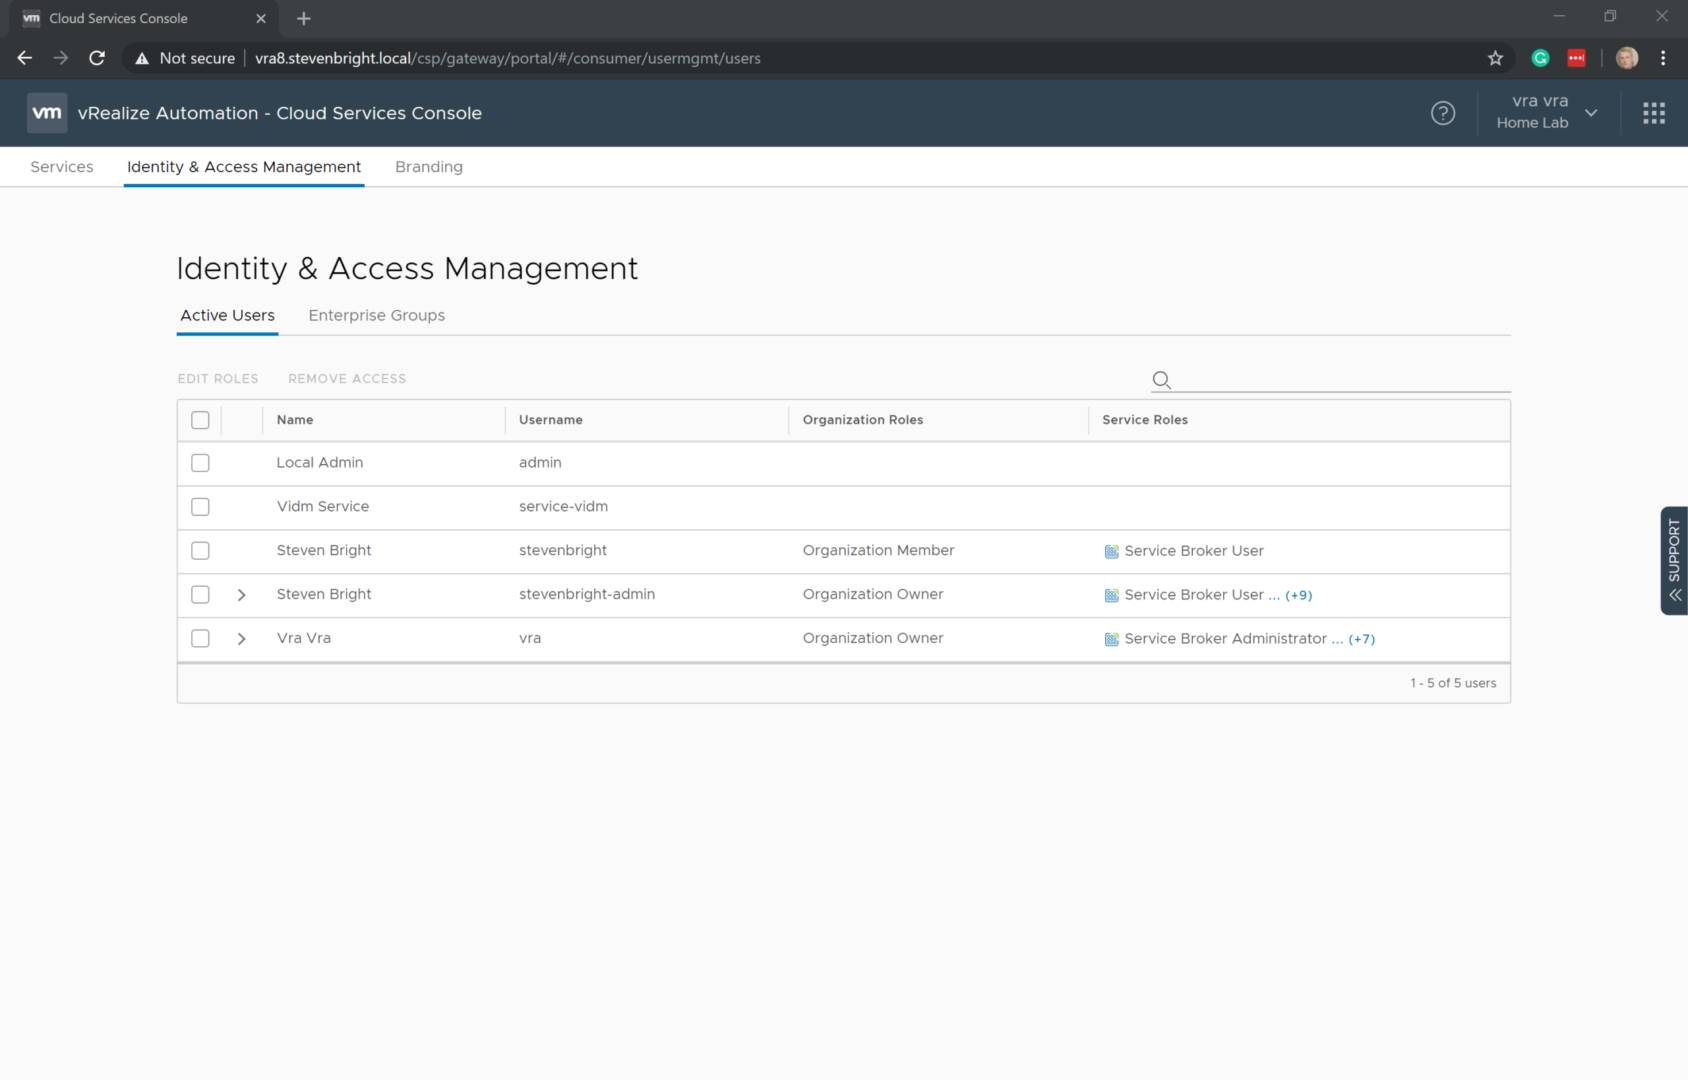 vRealize Automation 8.0 - Identity and Access Management - Users